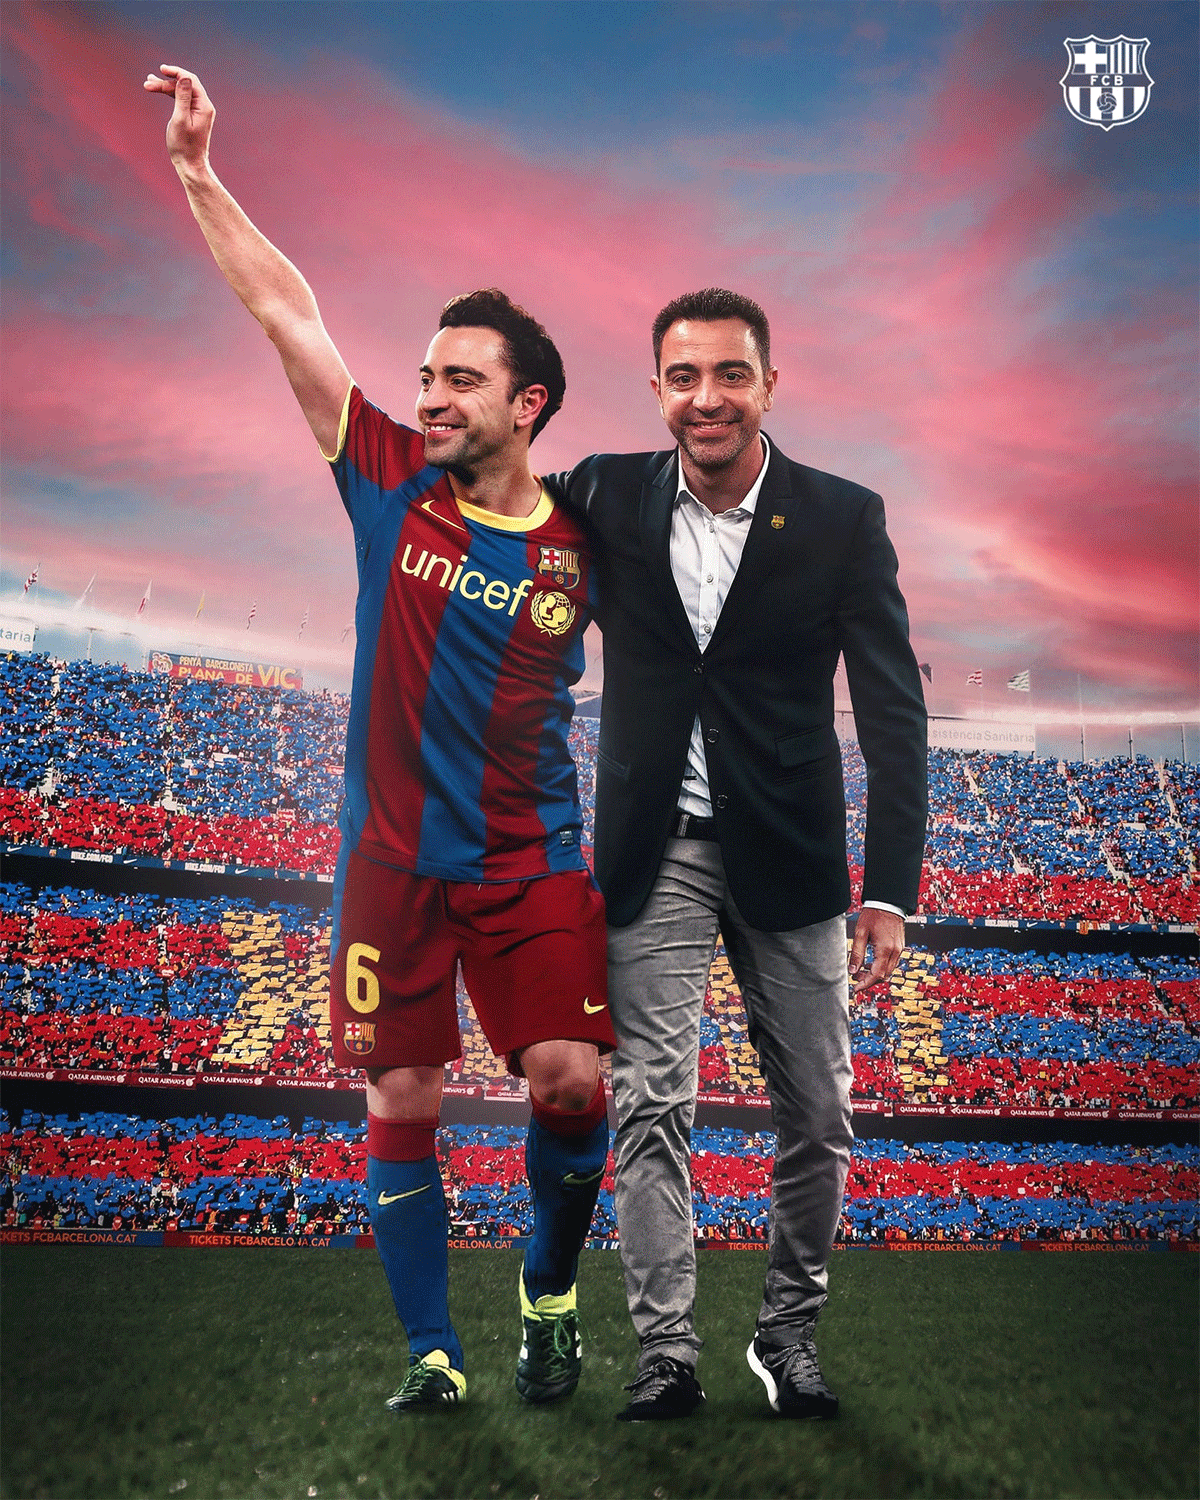 'I will work and fight with you all to reach together the place we deserve. Thank you #fcbarcelona for trusting me, as well as to all the fans who believed that I should take on this important role. THE STORY CONTINUES ...'